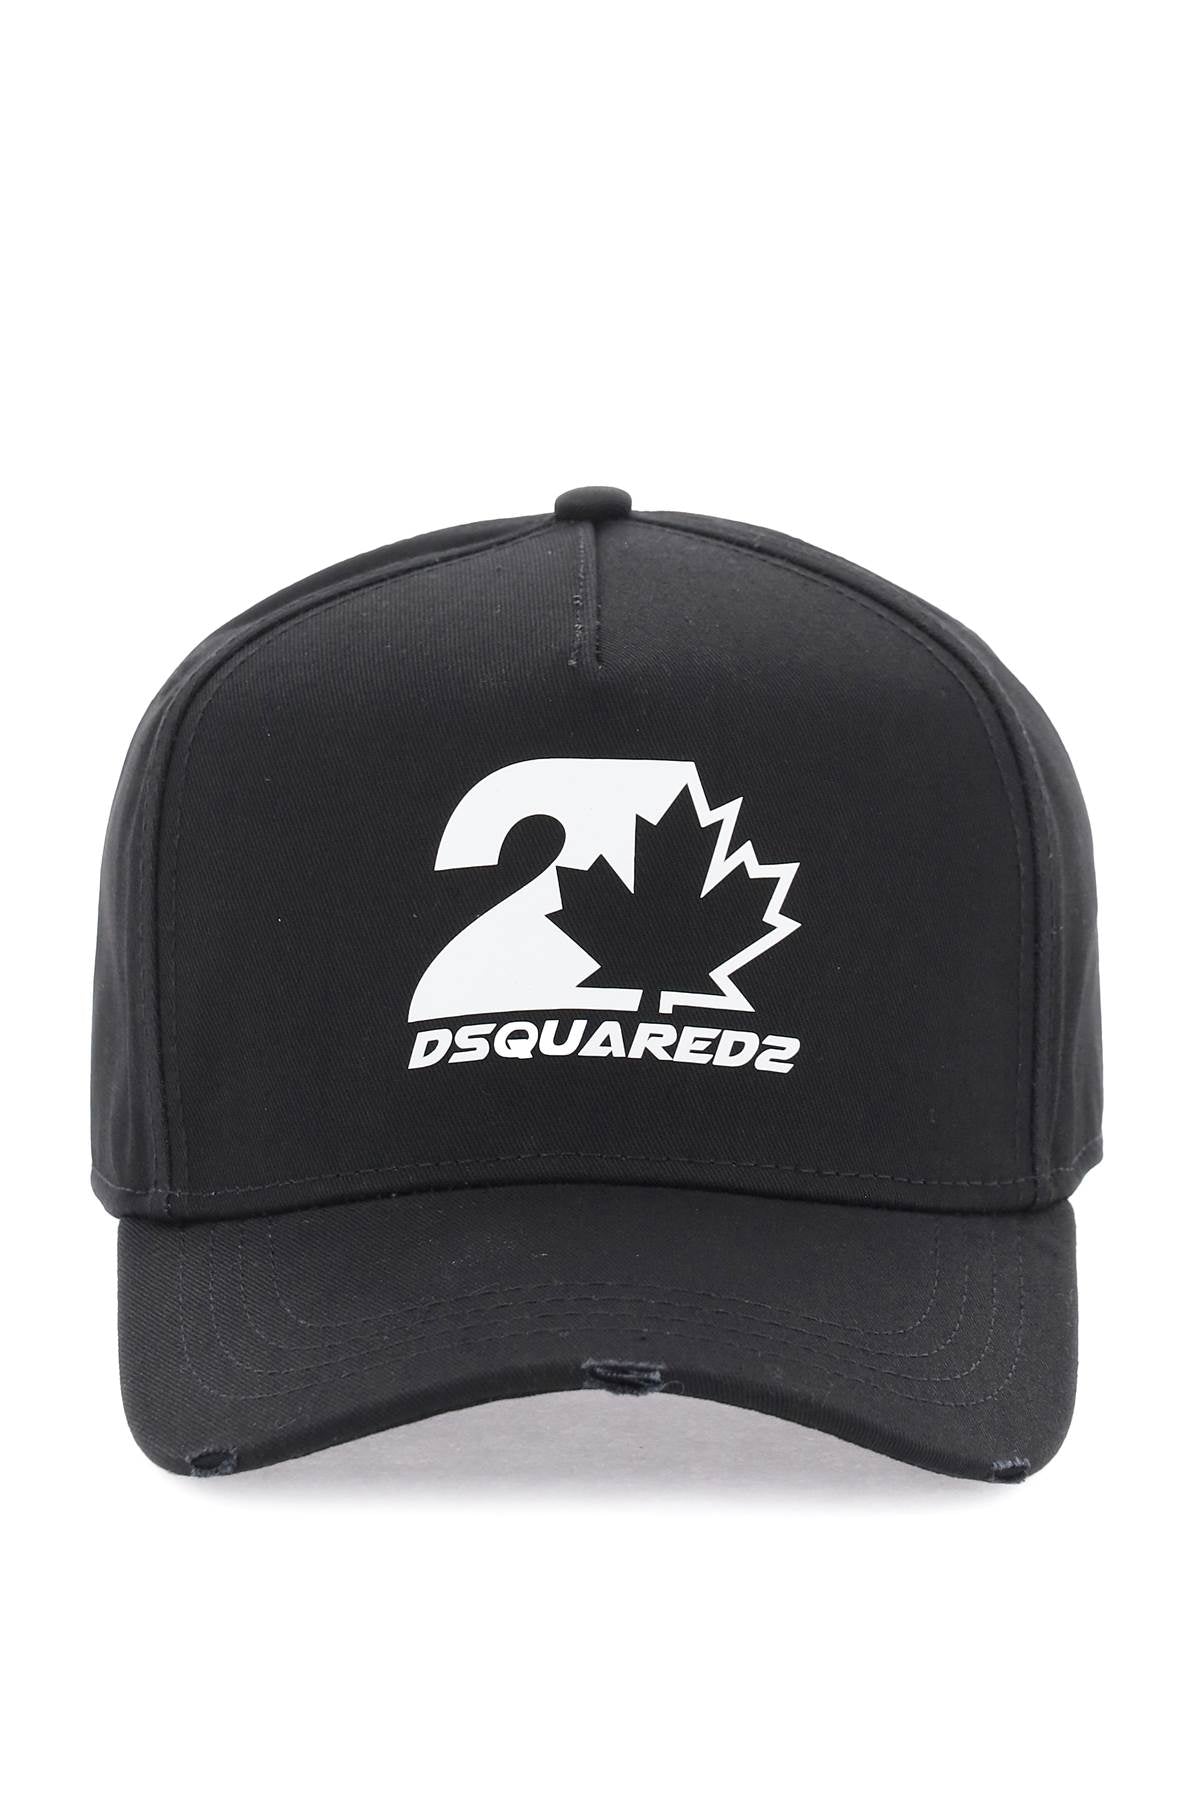 Dsquared2 baseball cap with logoed patch-0